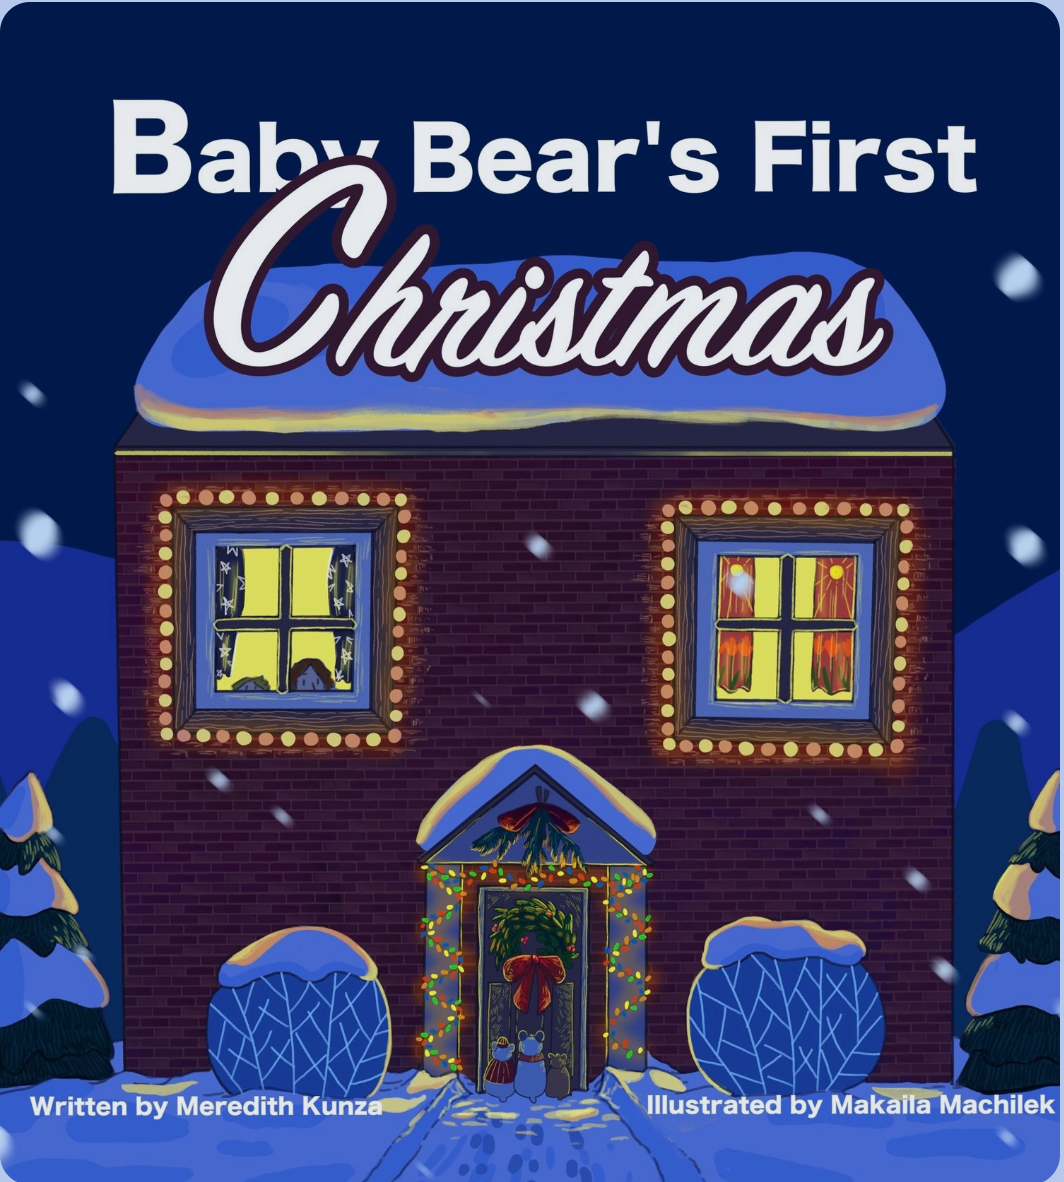 Baby Bear's First Christmas